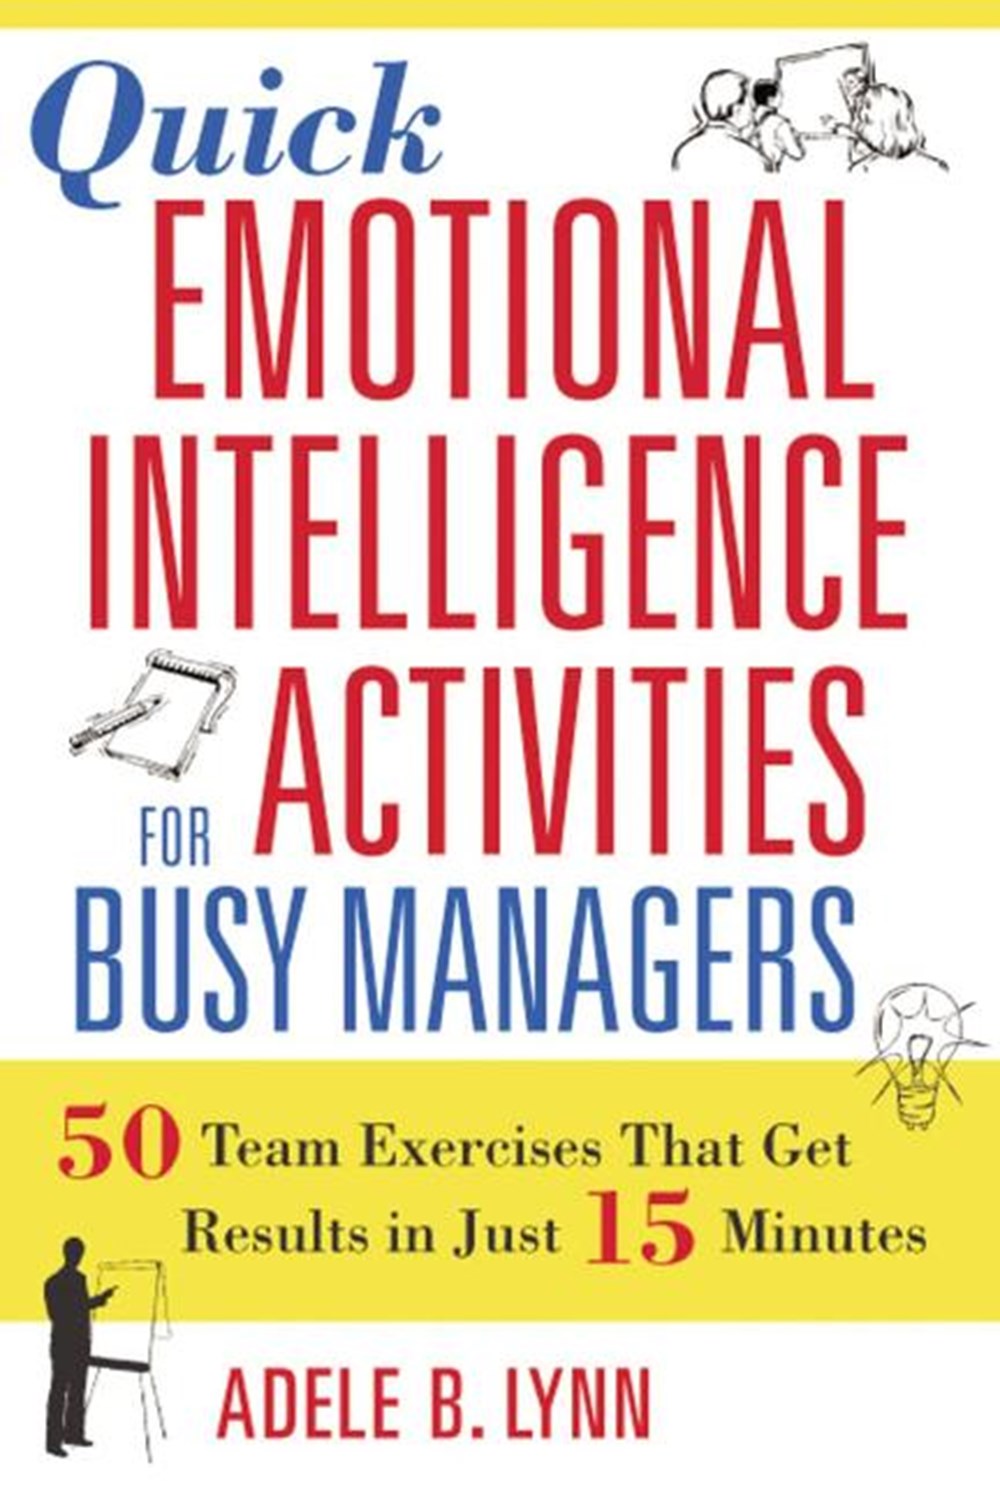 Quick Emotional Intelligence Activities for Busy Managers: 50 Team Exercises That Get Results in Jus